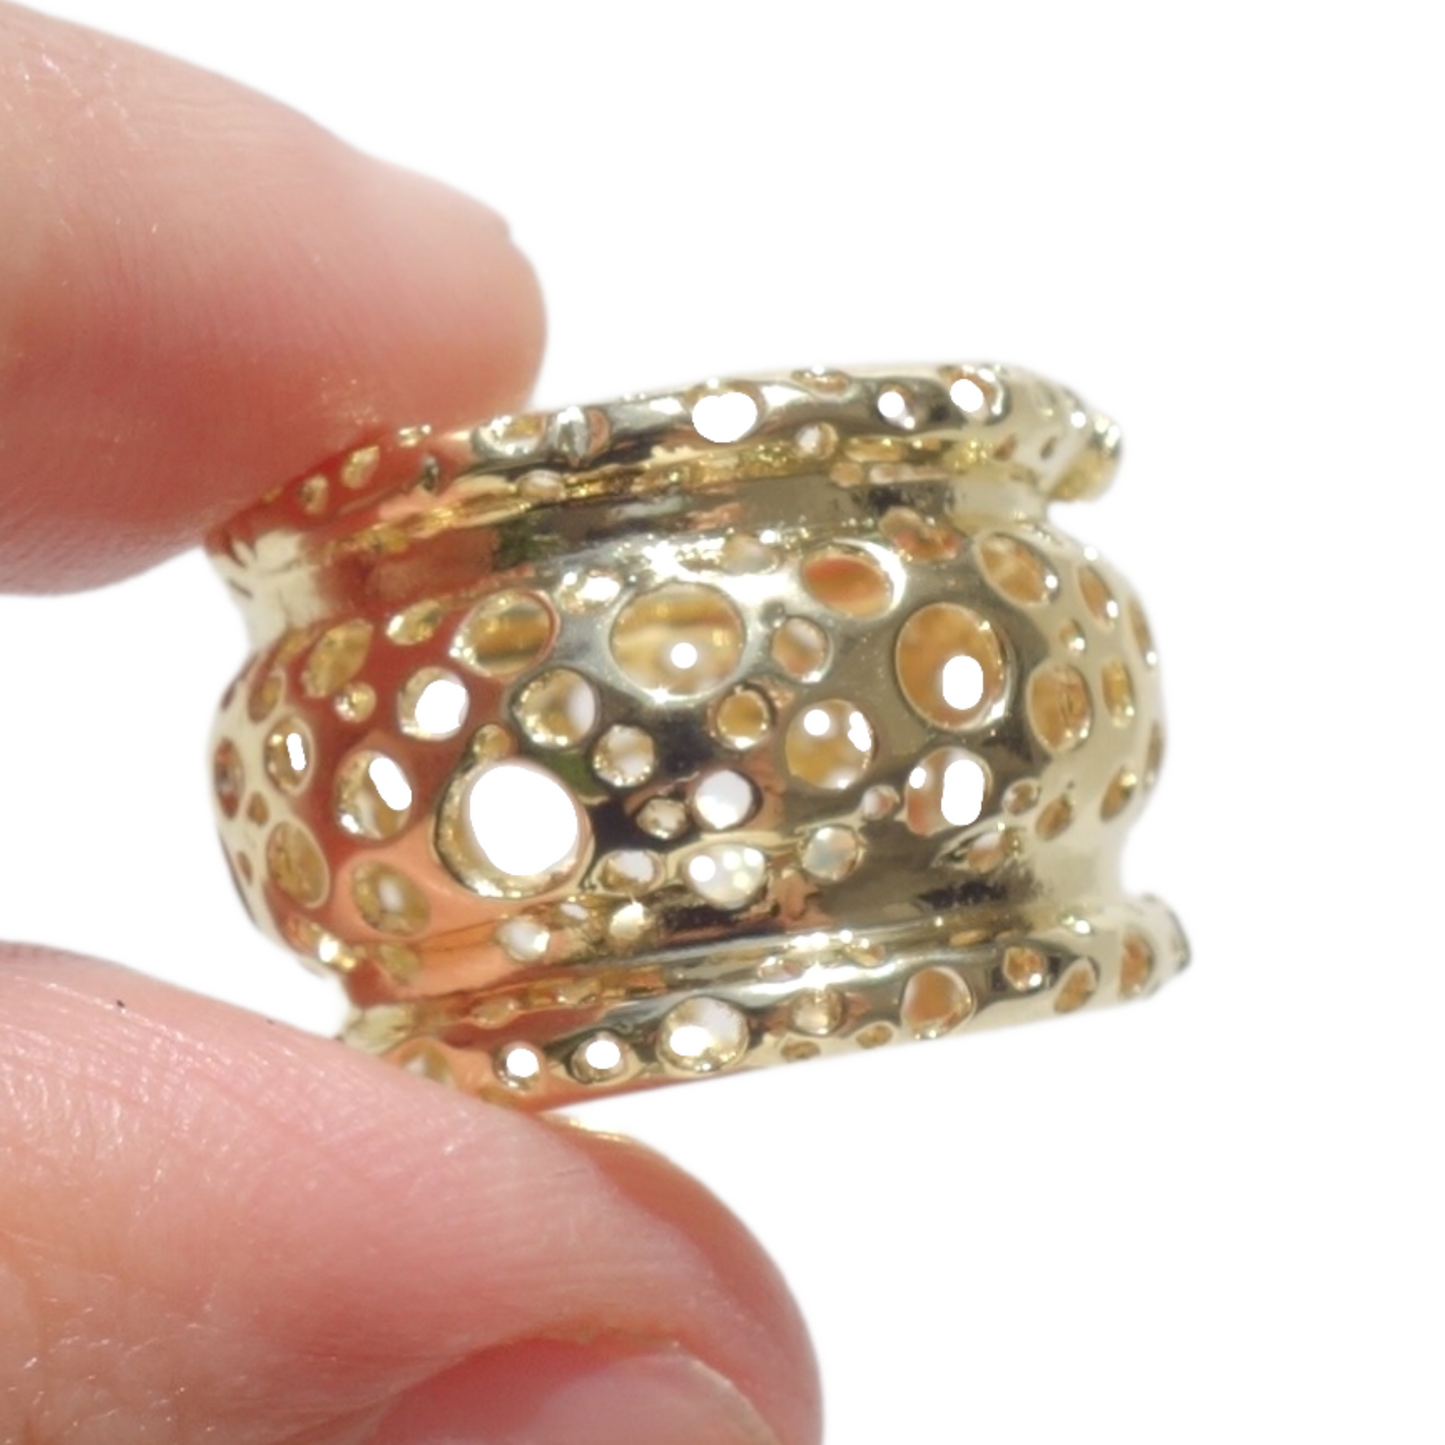 SOLID GOLD 14K Wide Ring, Bubbles Textured Ring, Unique Wedding Band